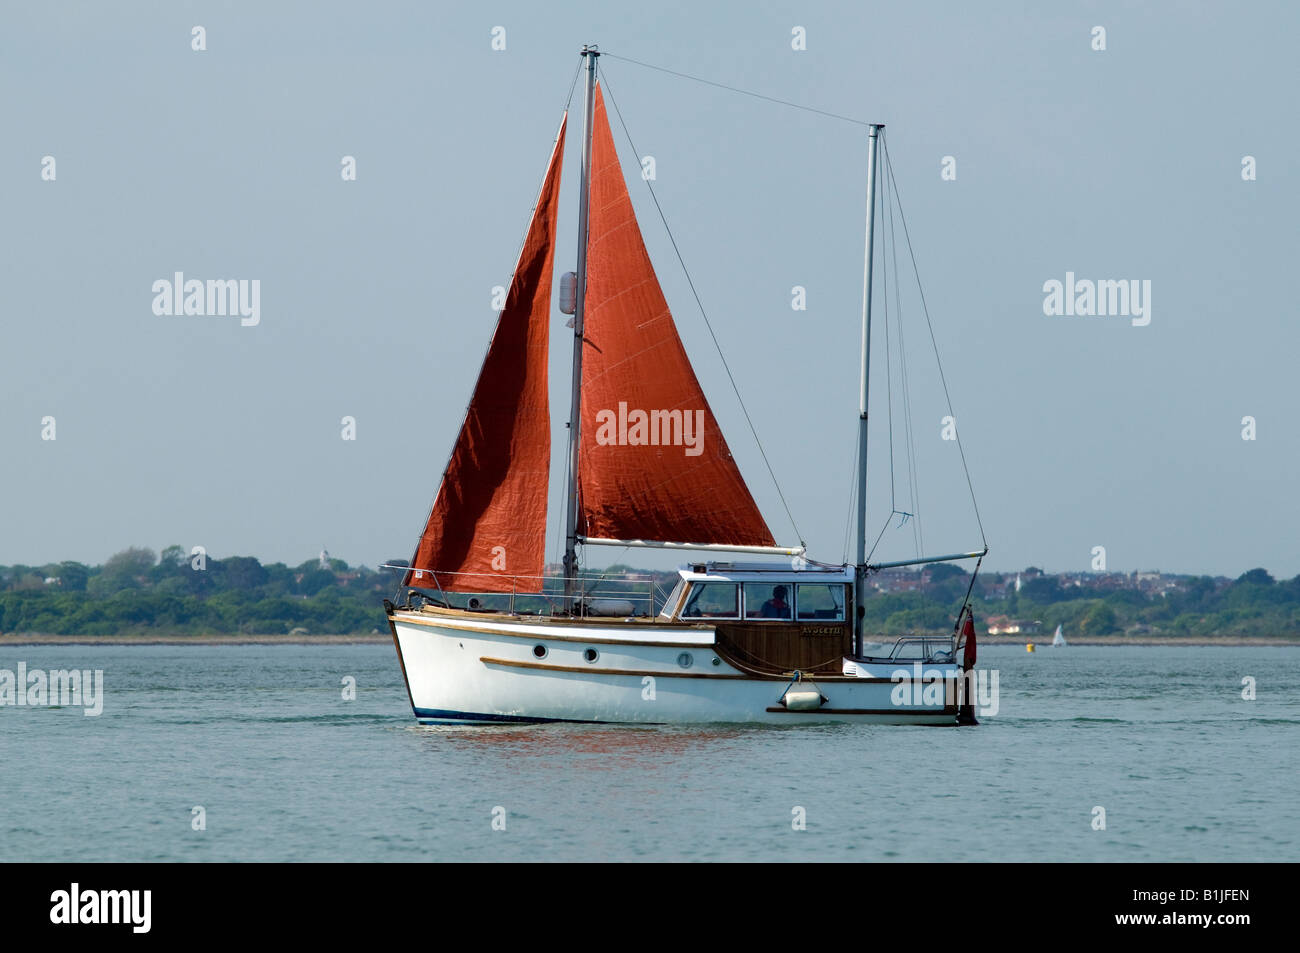 wooden cabin sailing boat with red sails side on at sea Stock Photo